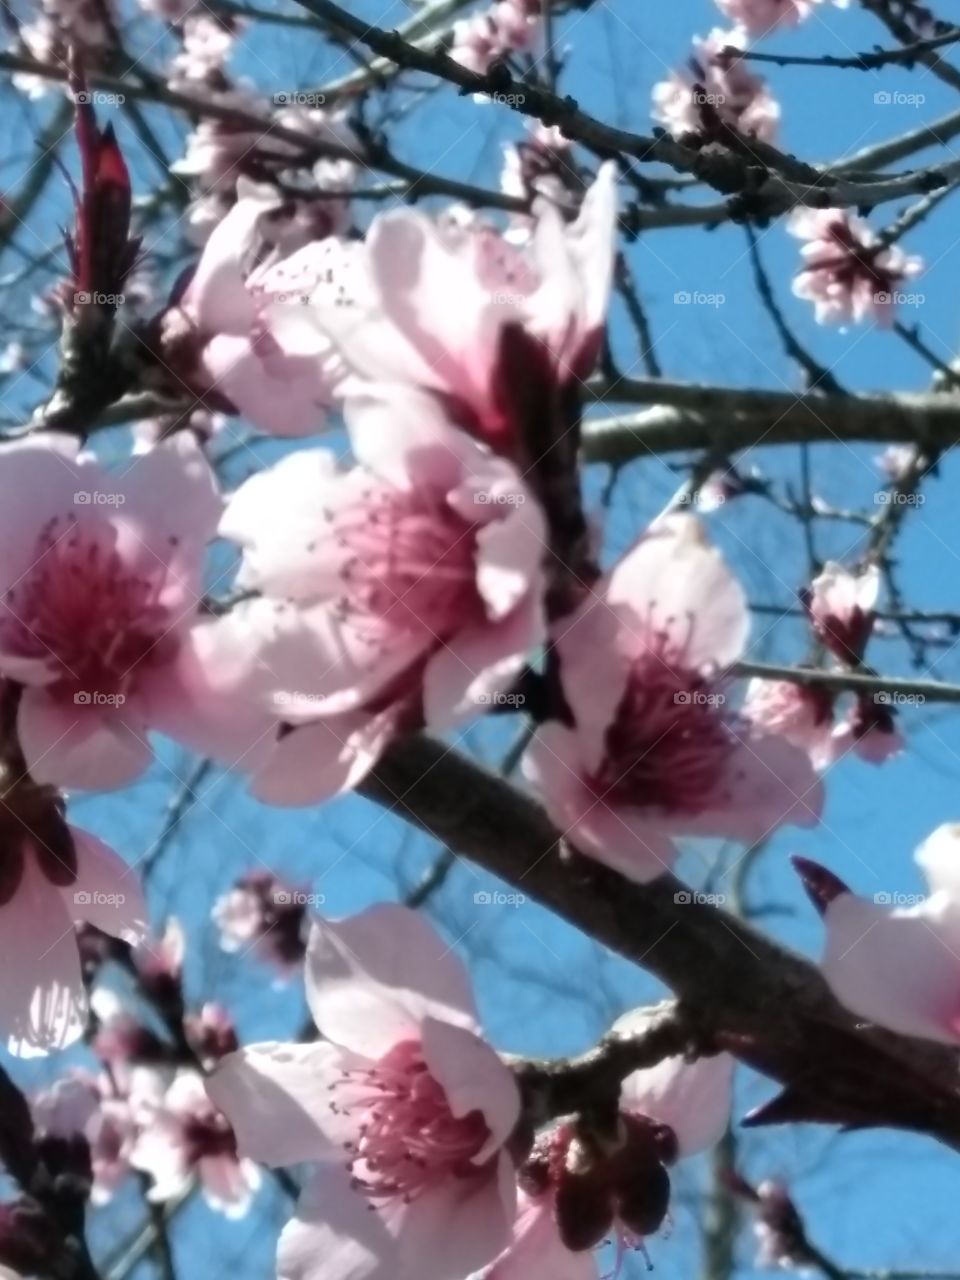 The first blooms of spring. Pink cherry blossoms. Simple with the blue sky in background and no other vegetation besides the brown branches. no filter all natural.